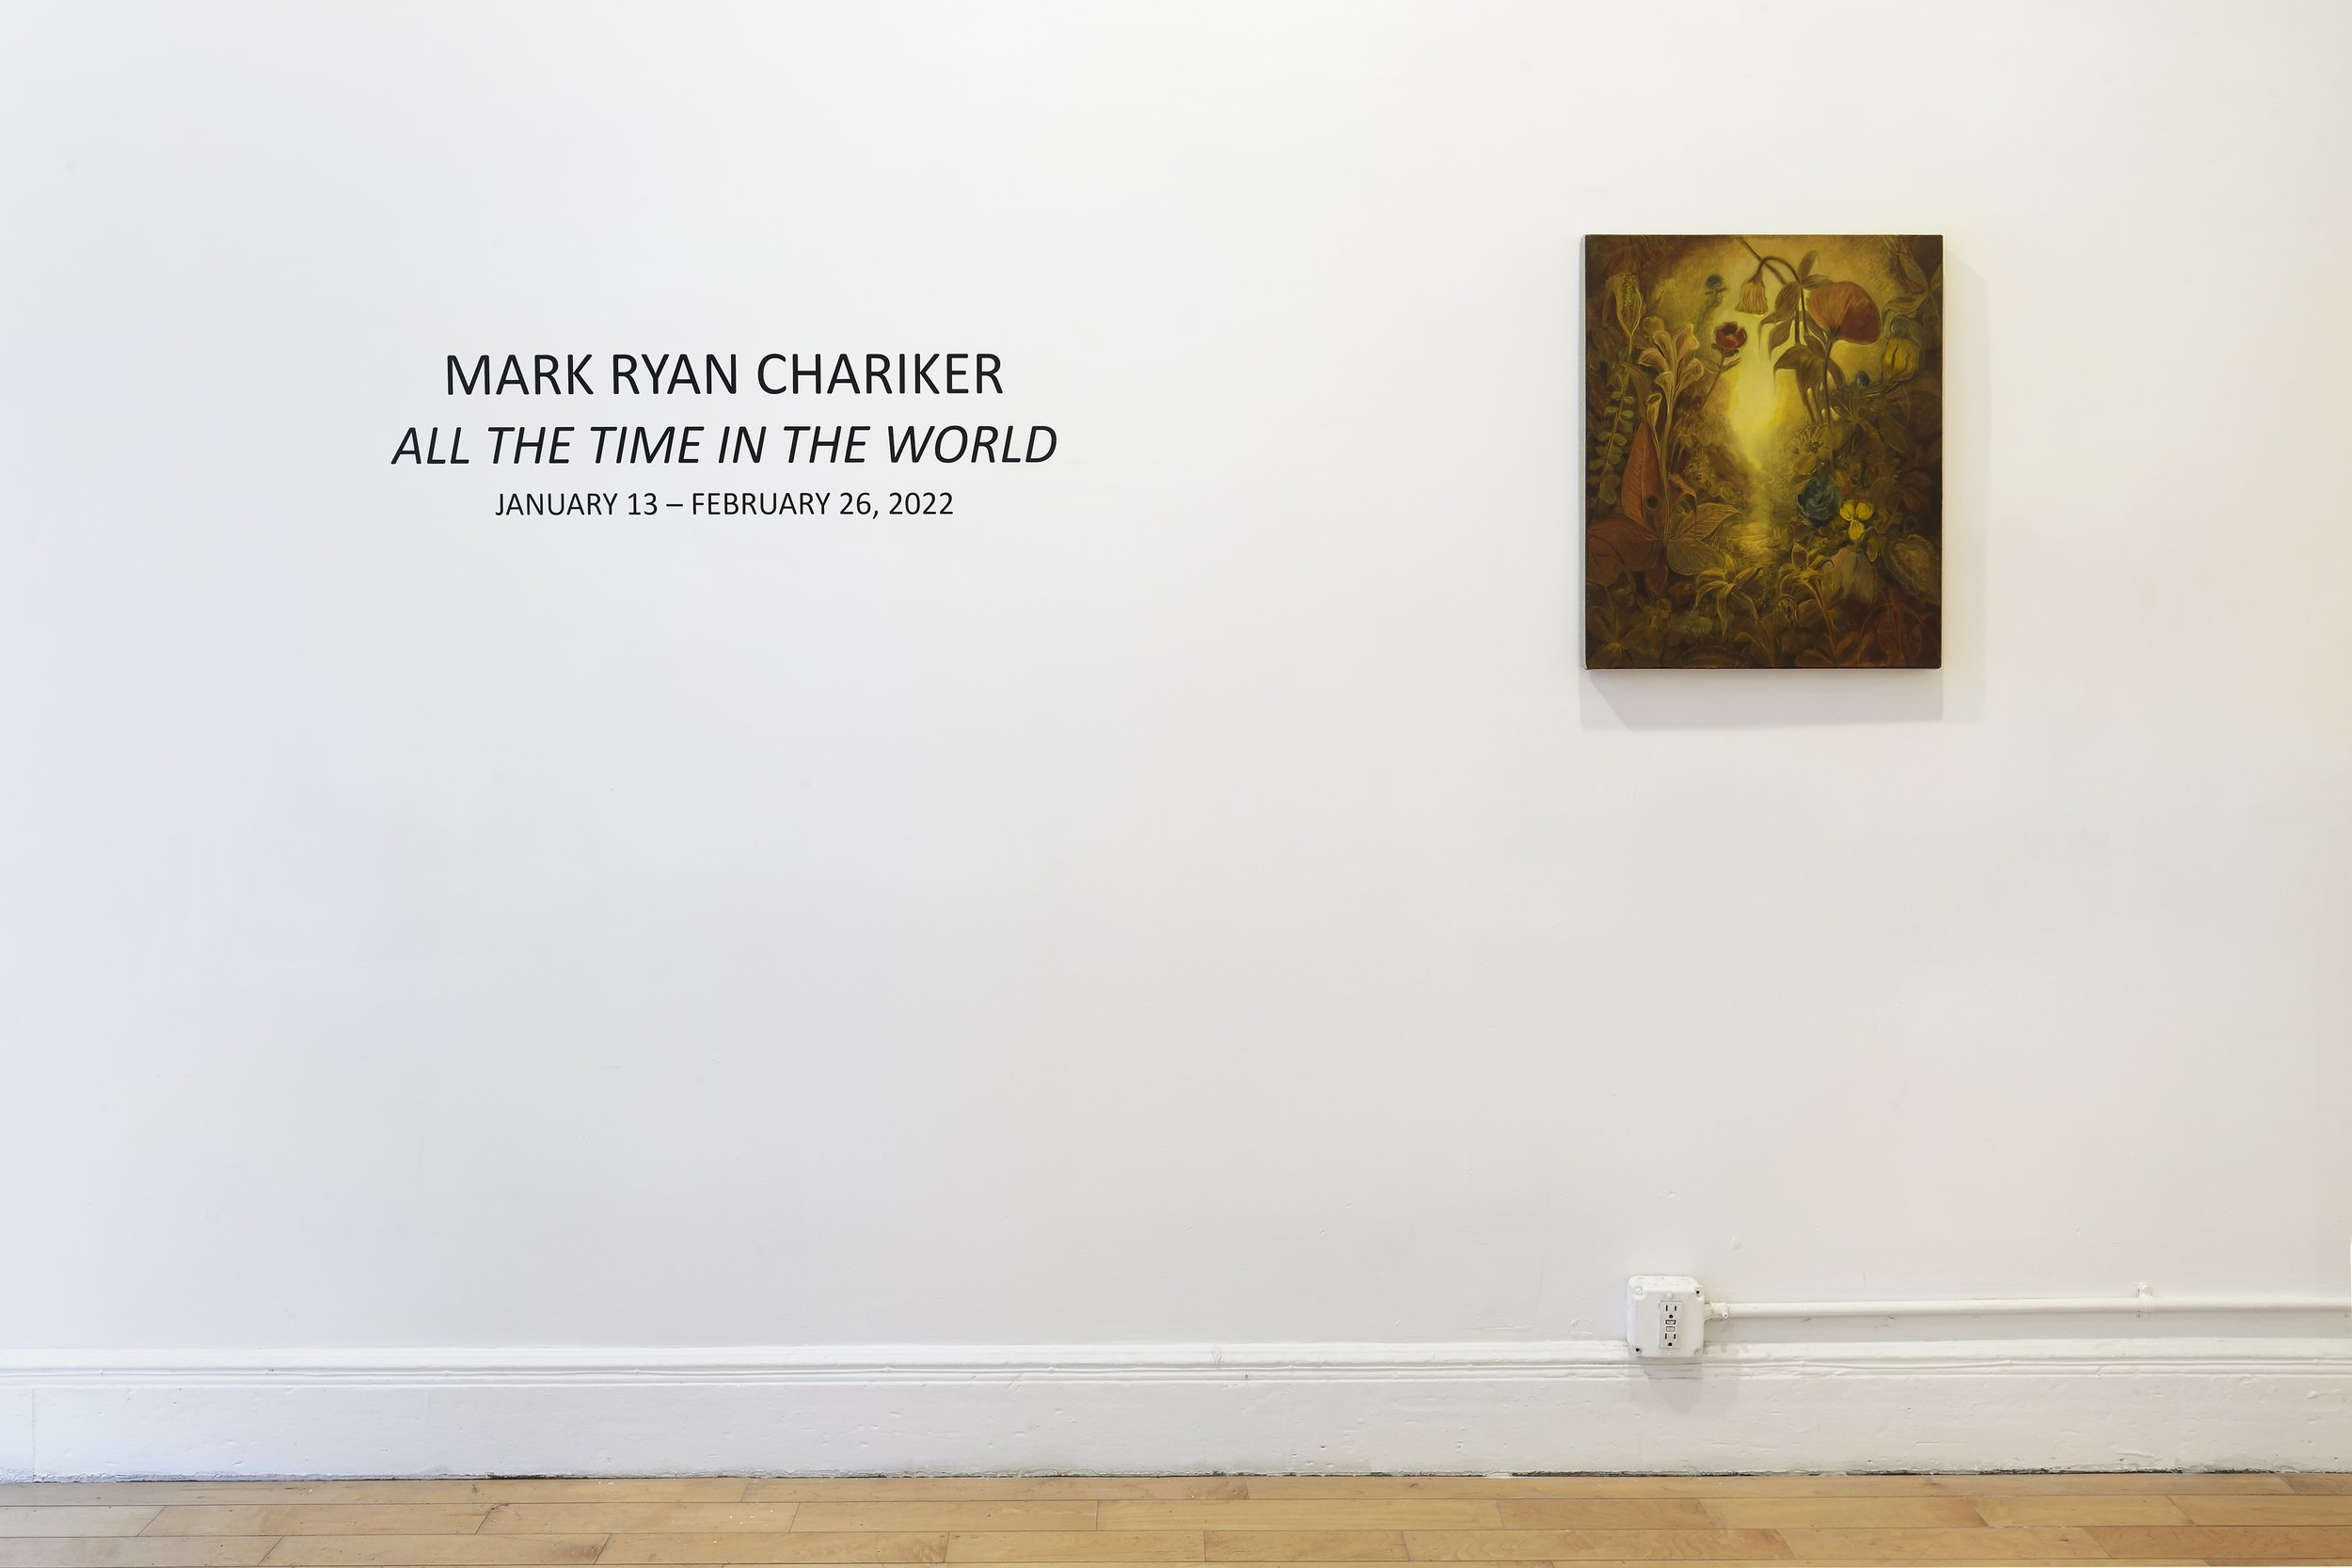 Mark Ryan Chariker, All the Time in the World, Install 9, 1969gallery.jpg